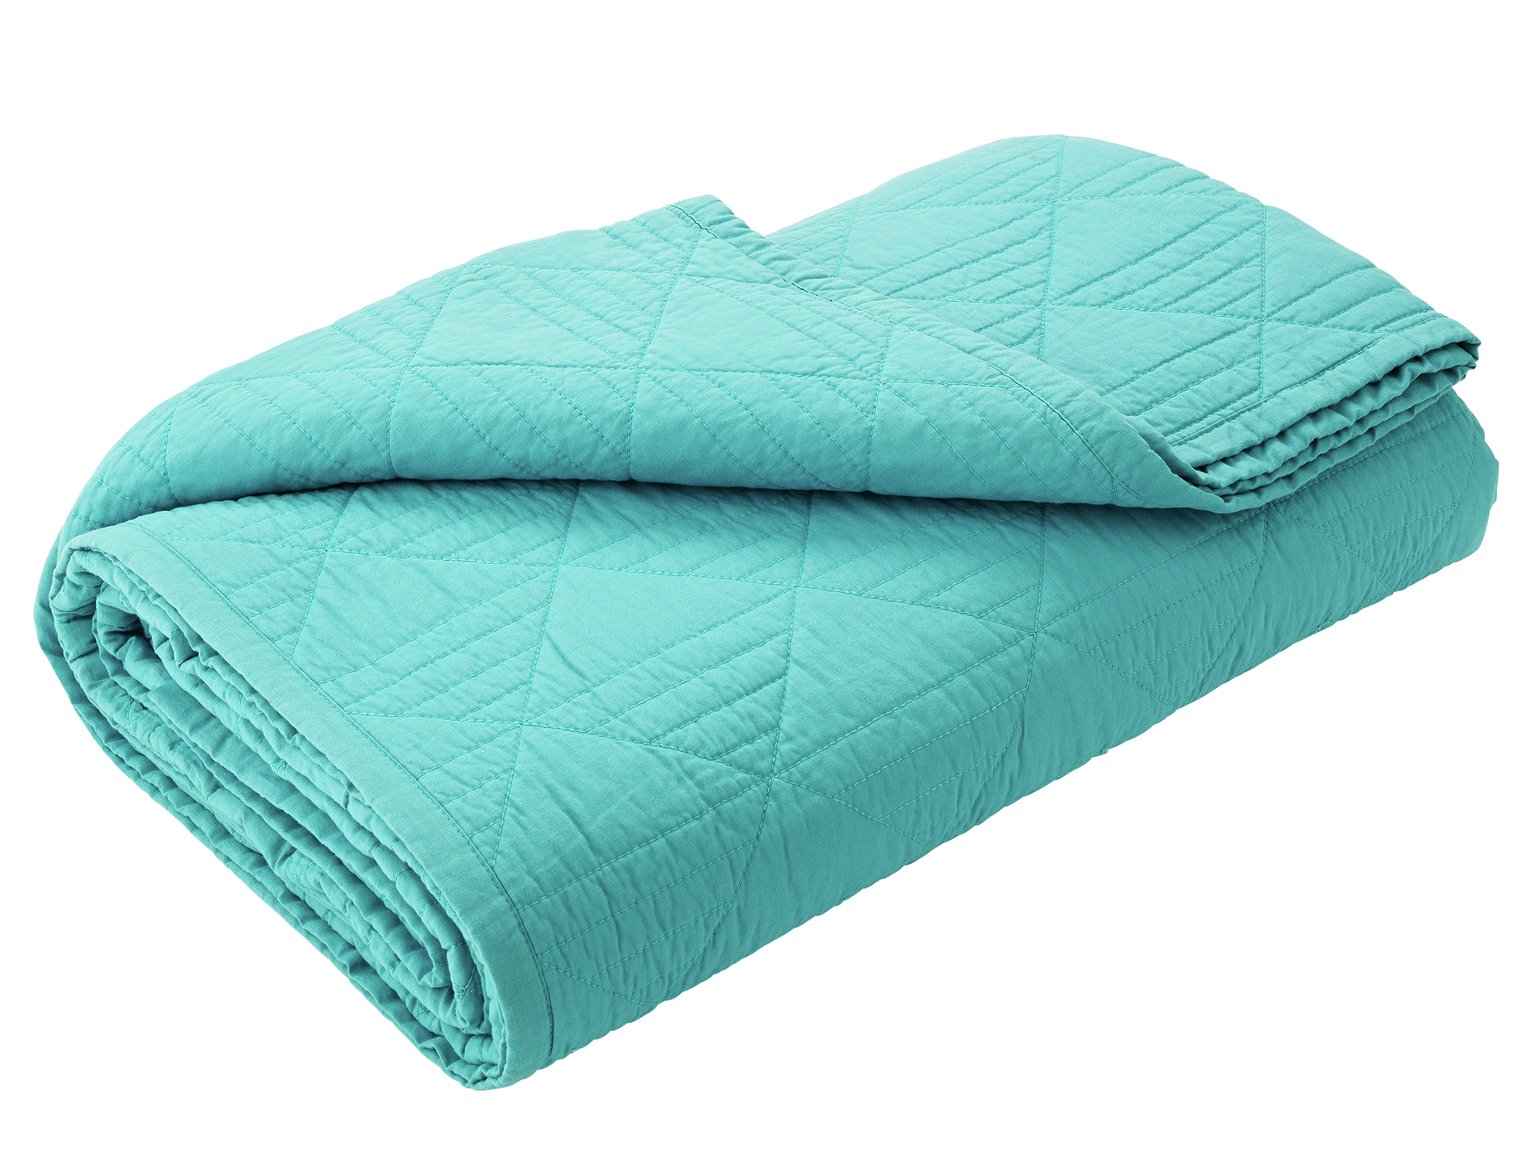 Sainsbury's Home Newstalgia Quilted Throw review